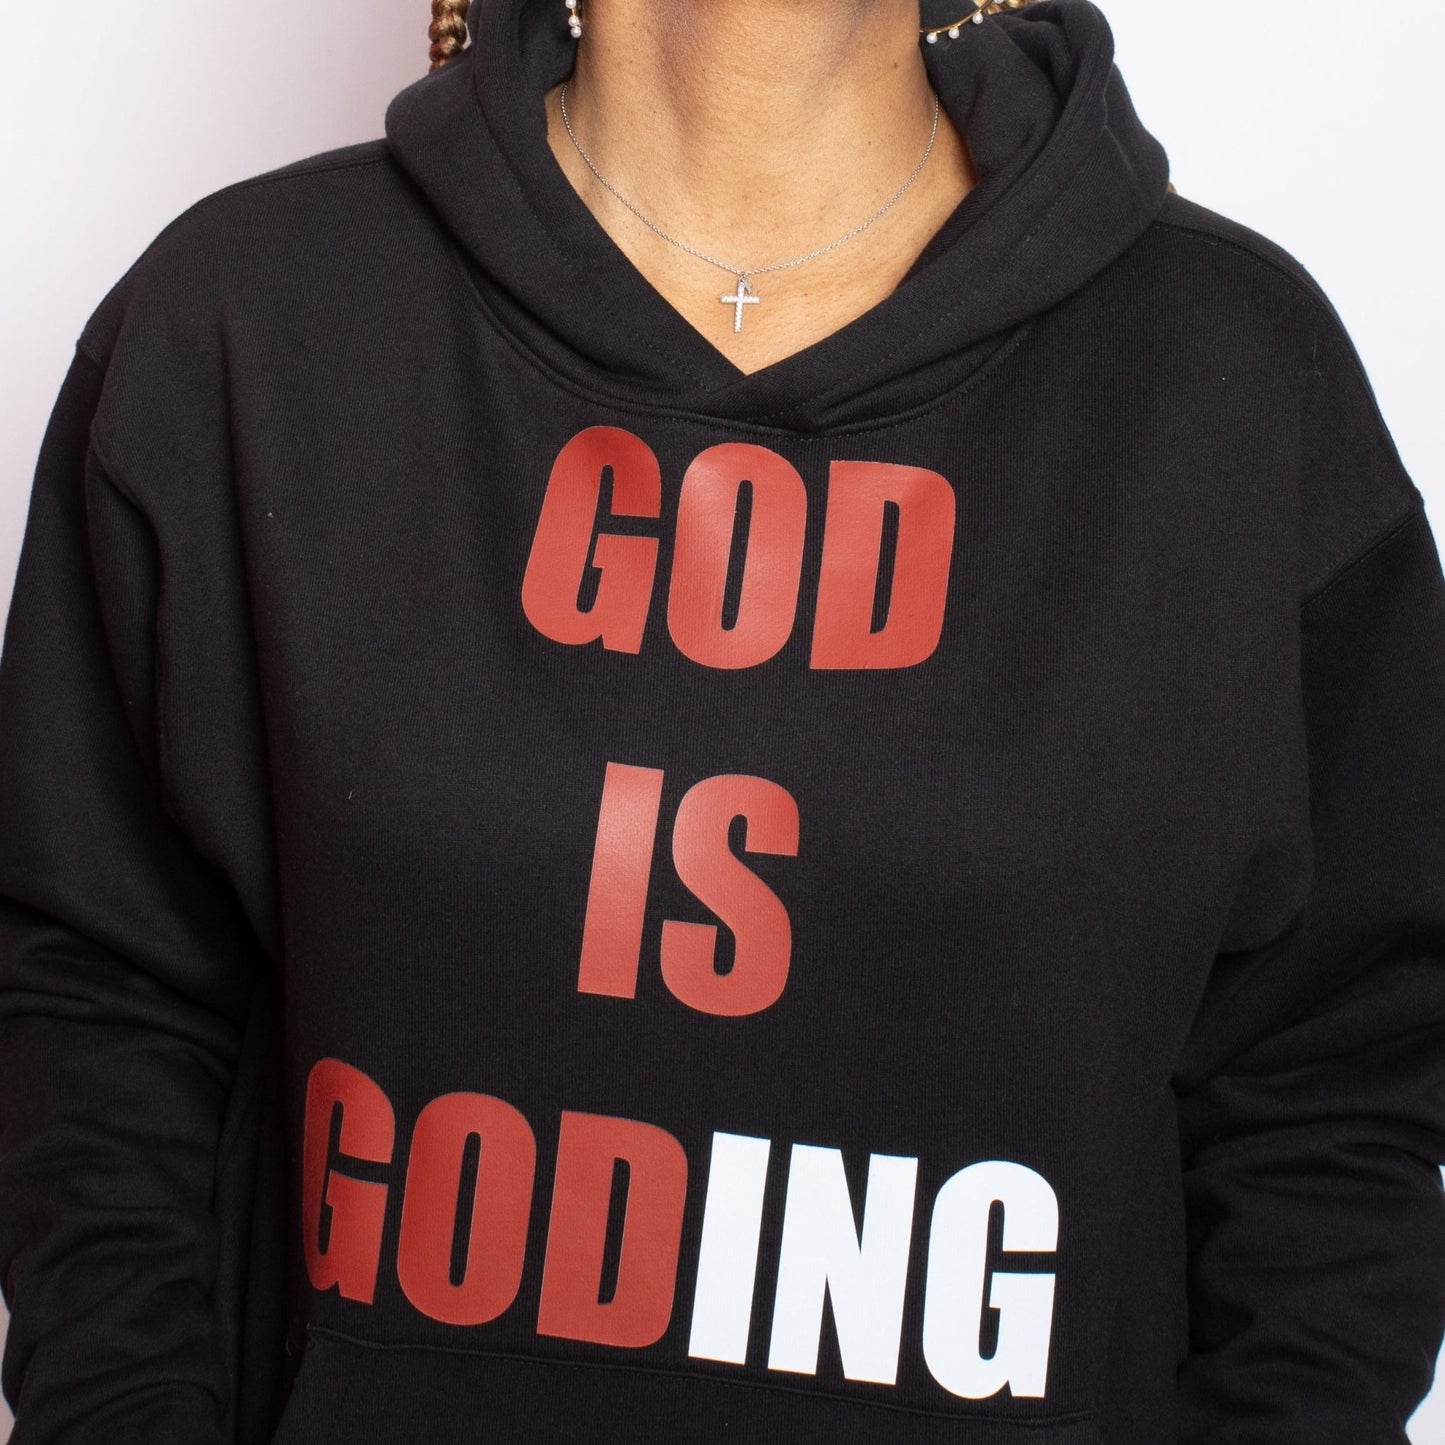 Women's God is GODing Tee/Hoodie - House of FaSHUN by Shun Melson